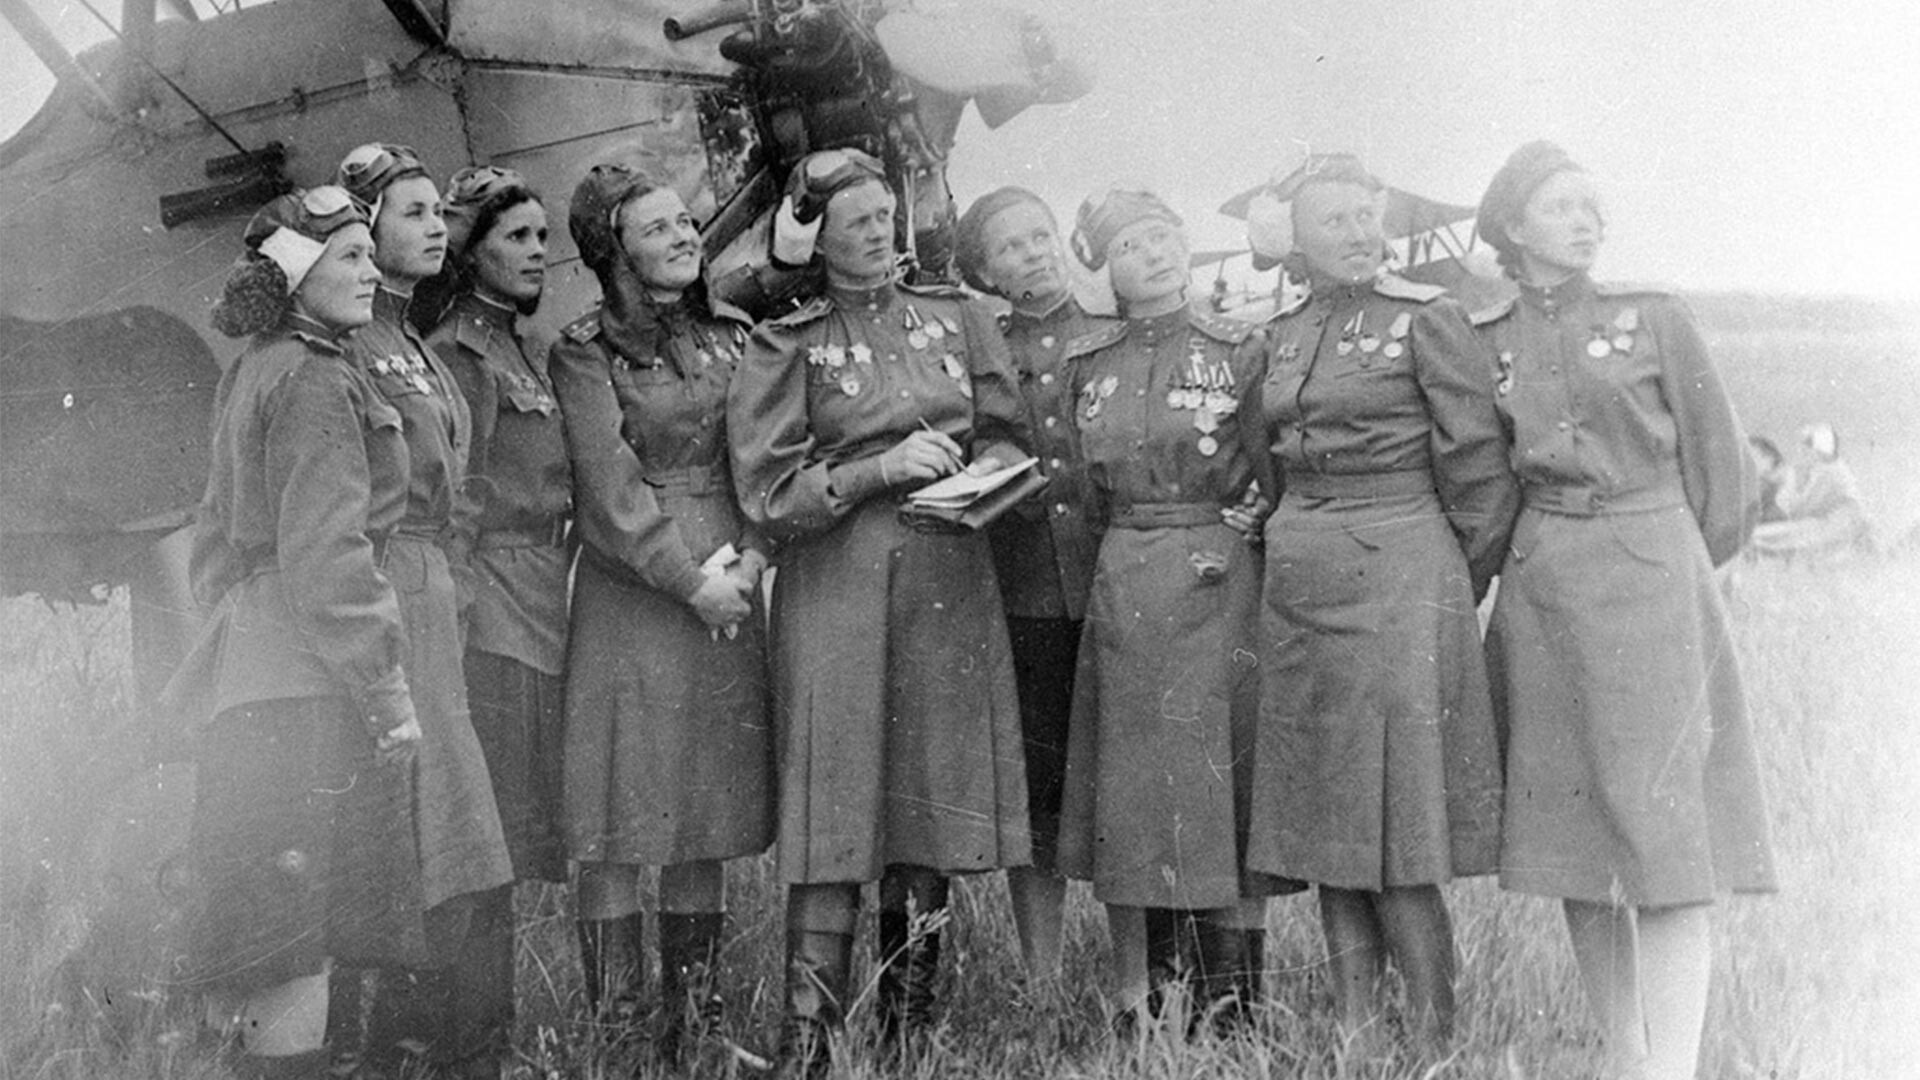 The airwomen of the 588th Night Bomber Regiment.